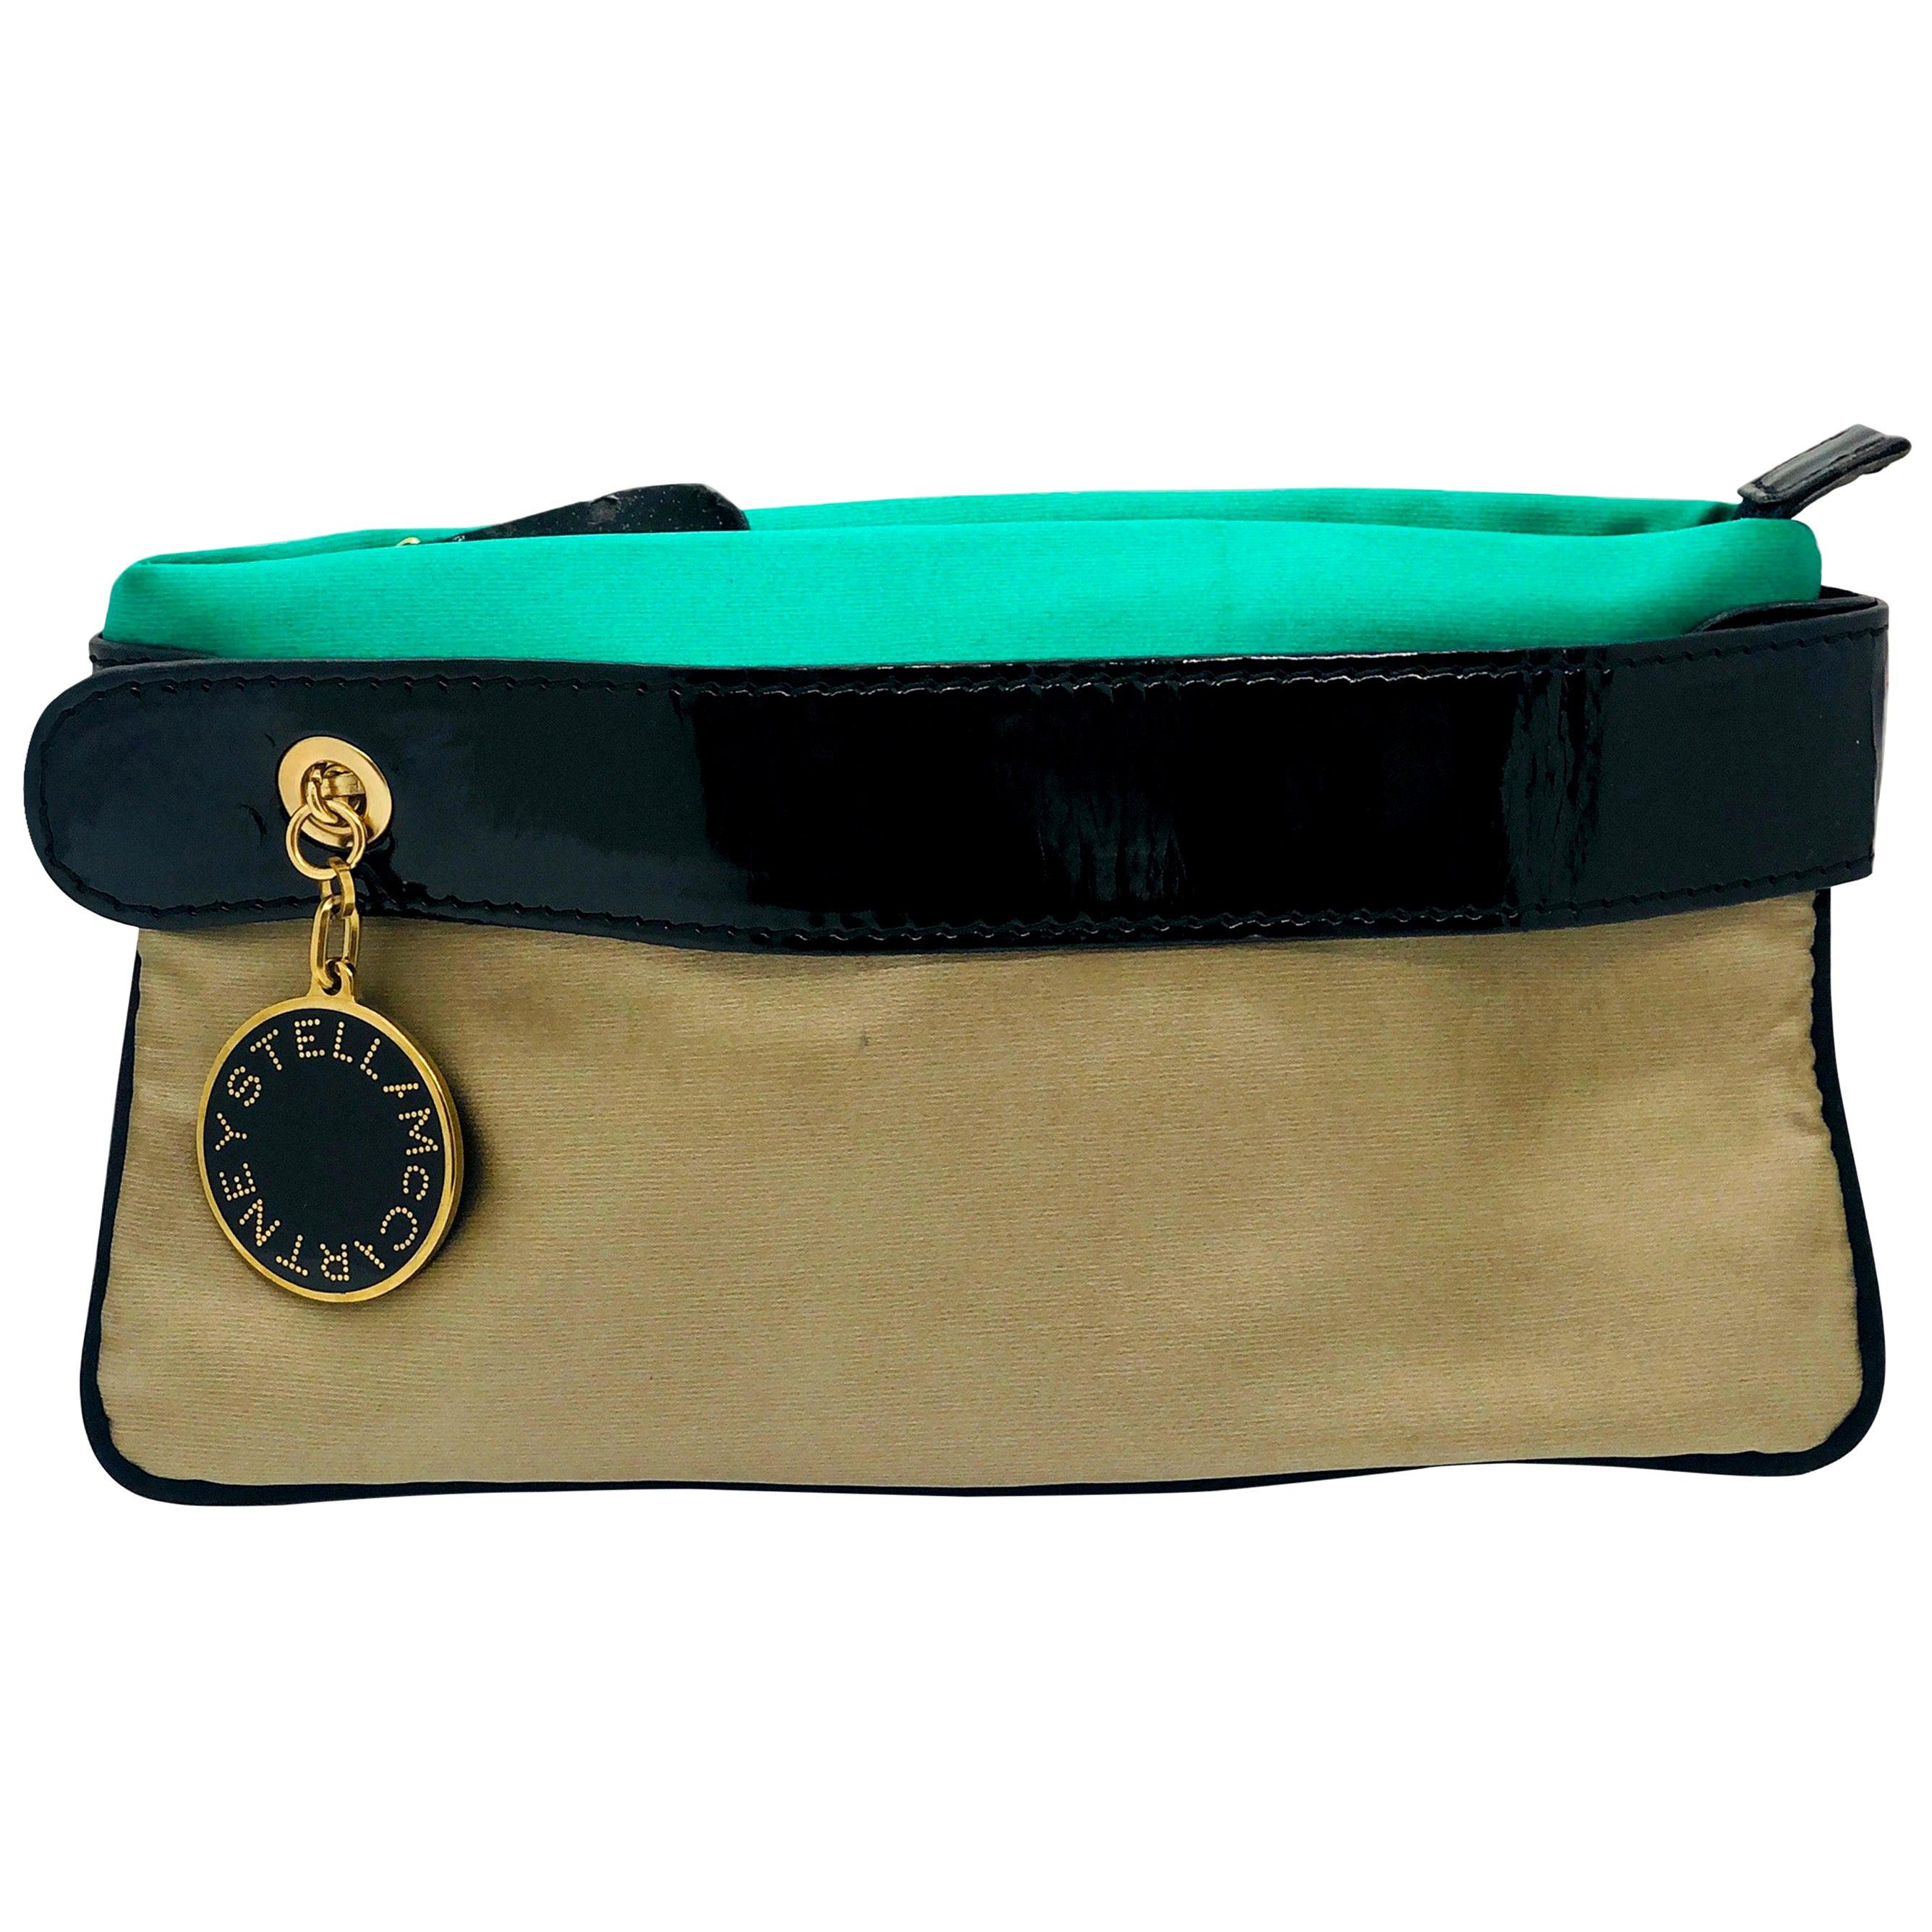 Make:  Stella McCartney
Place of Manufacture:  Italy
Type:  Clutch
Color:  Mint green, champagne, khaki (tan) and black with gold tone metal
Materials:  Silk, faux patent (our girl Stella does not use animal products) and gold tone metal
Condition: 